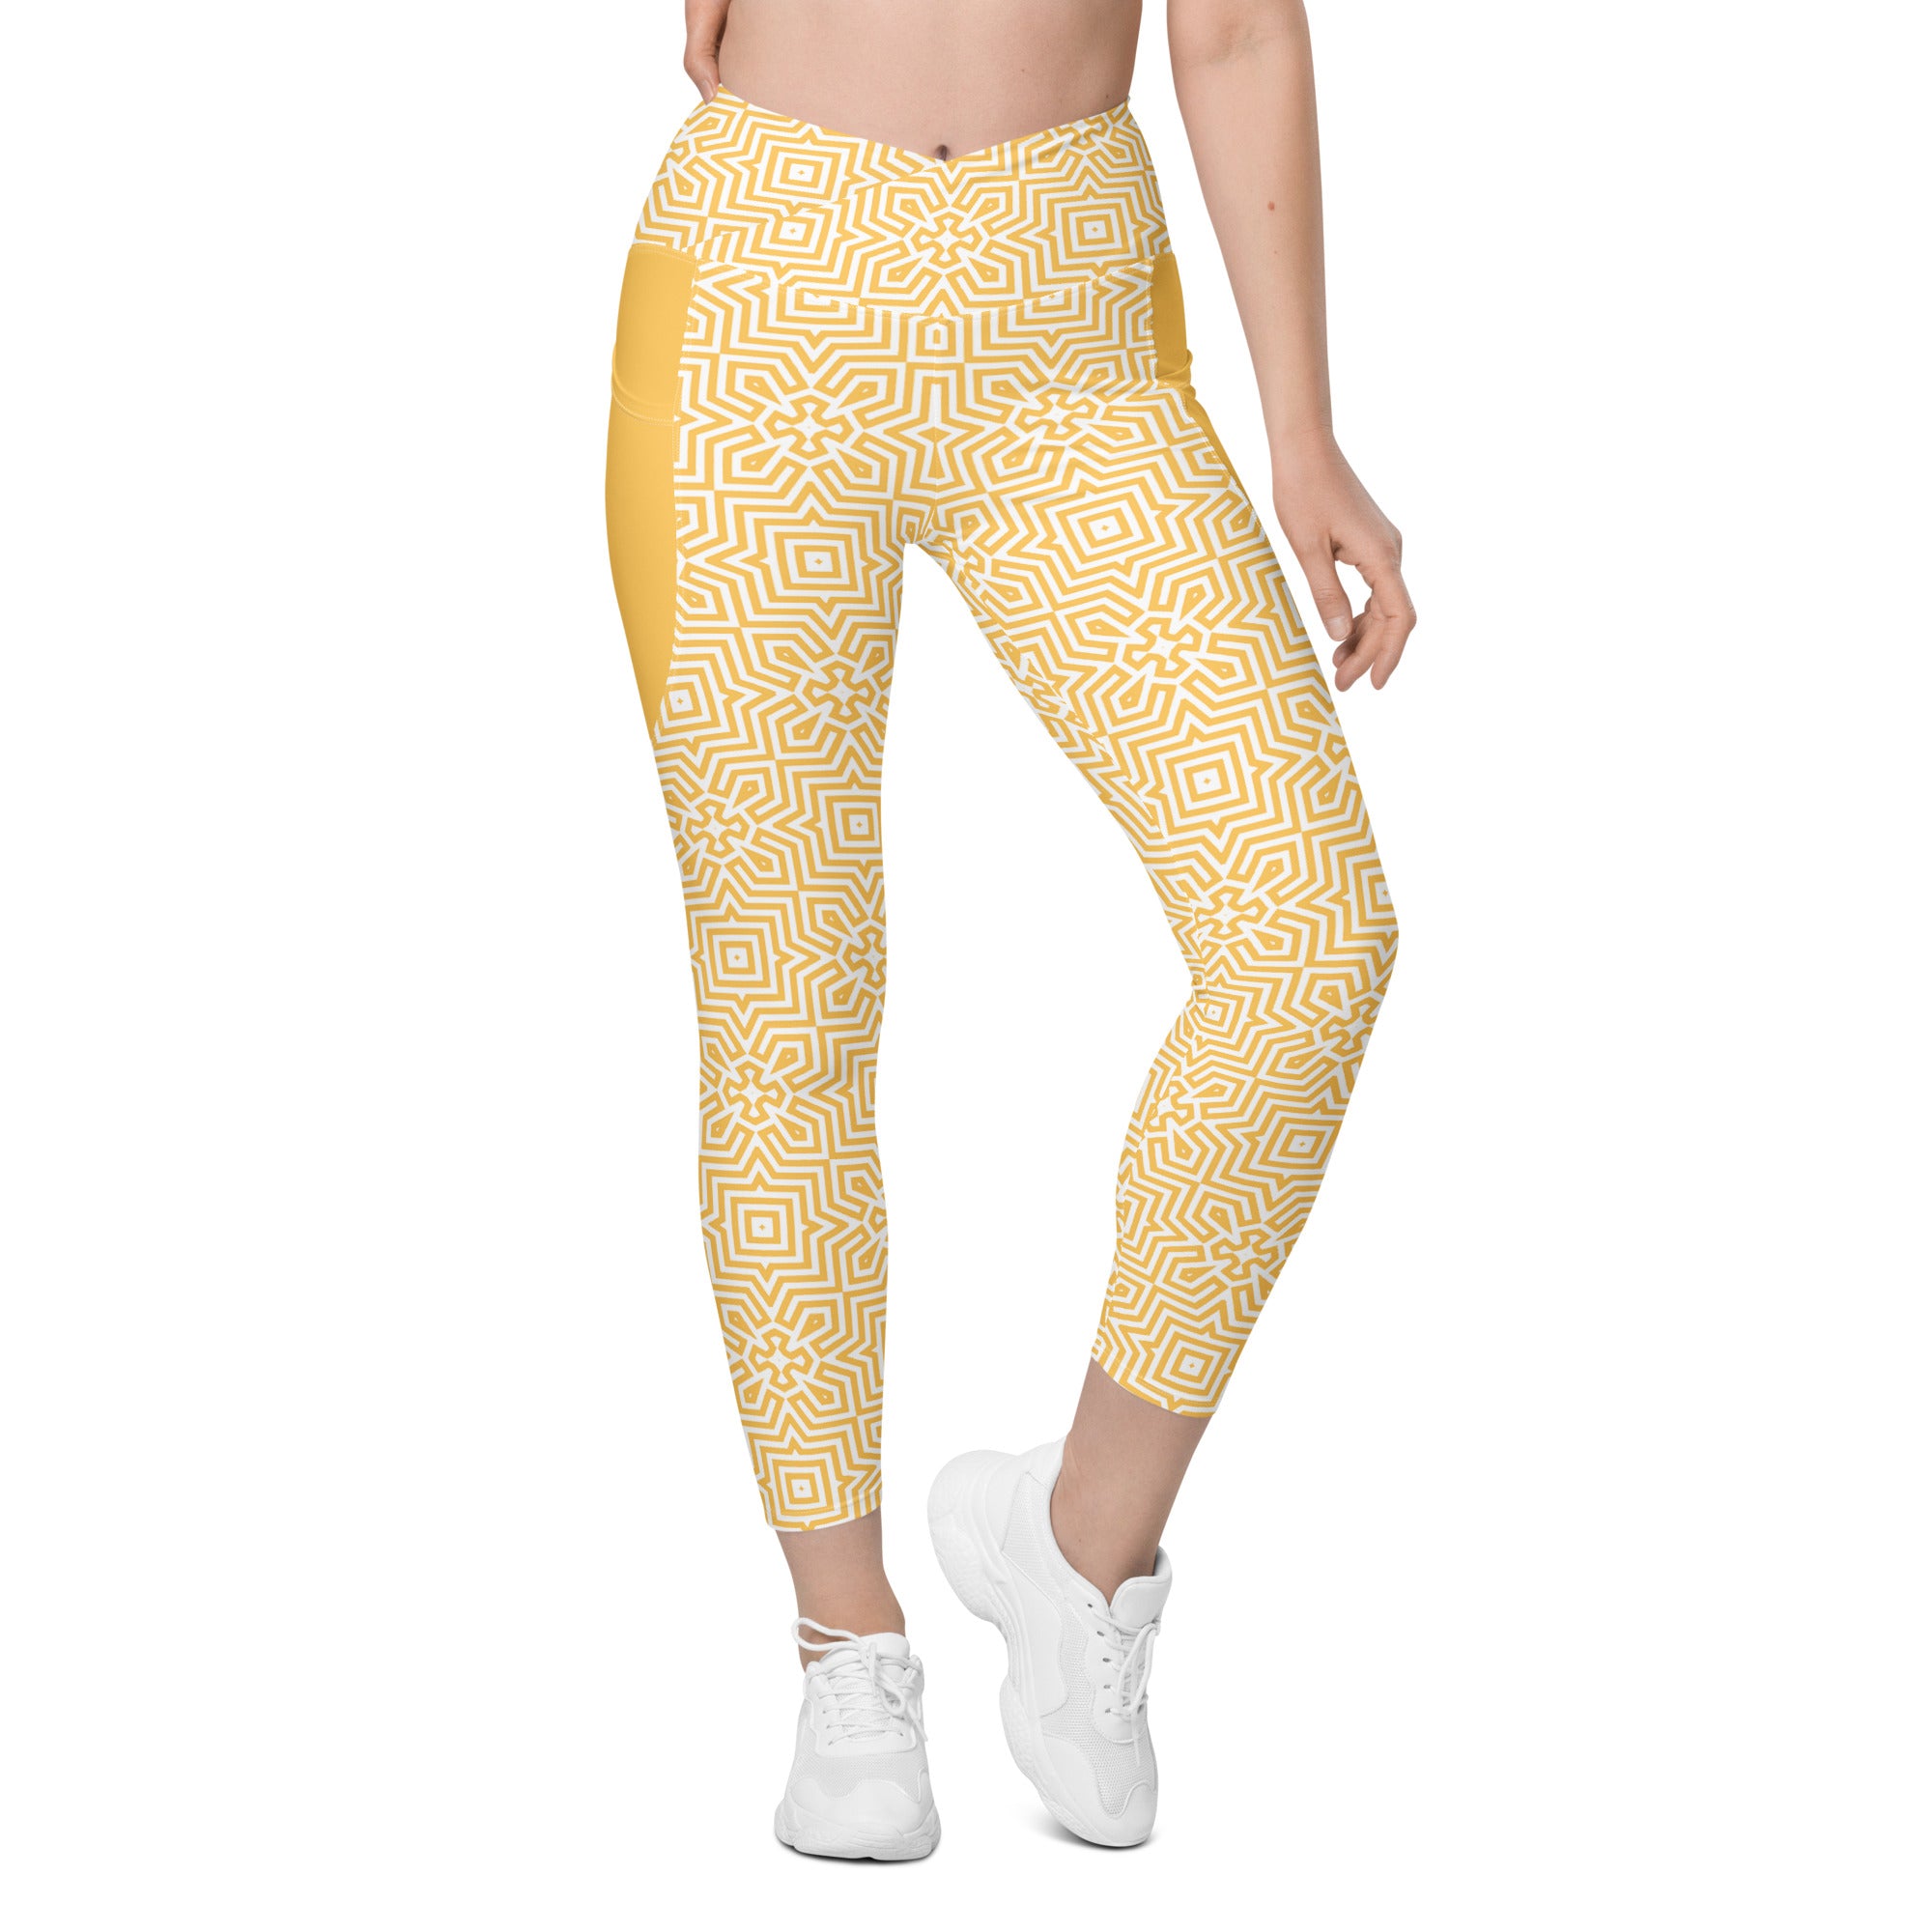 Moroccan Magic Crossover Leggings with side pockets for women.